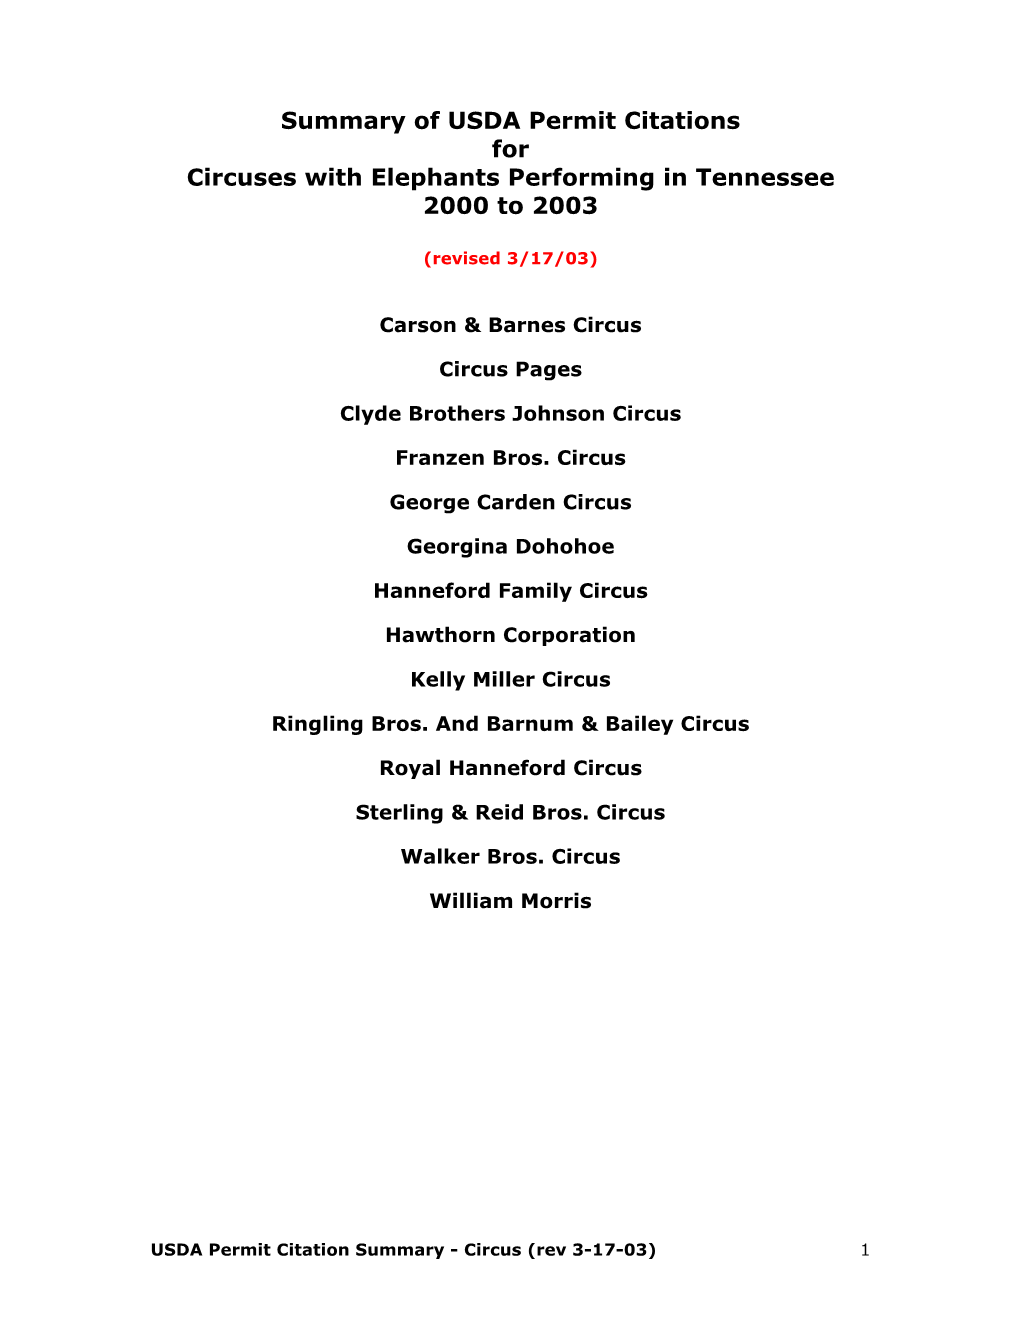 Summary of USDA Permit Citations for Circuses with Elephants Performing in Tennessee 2000 to 2003